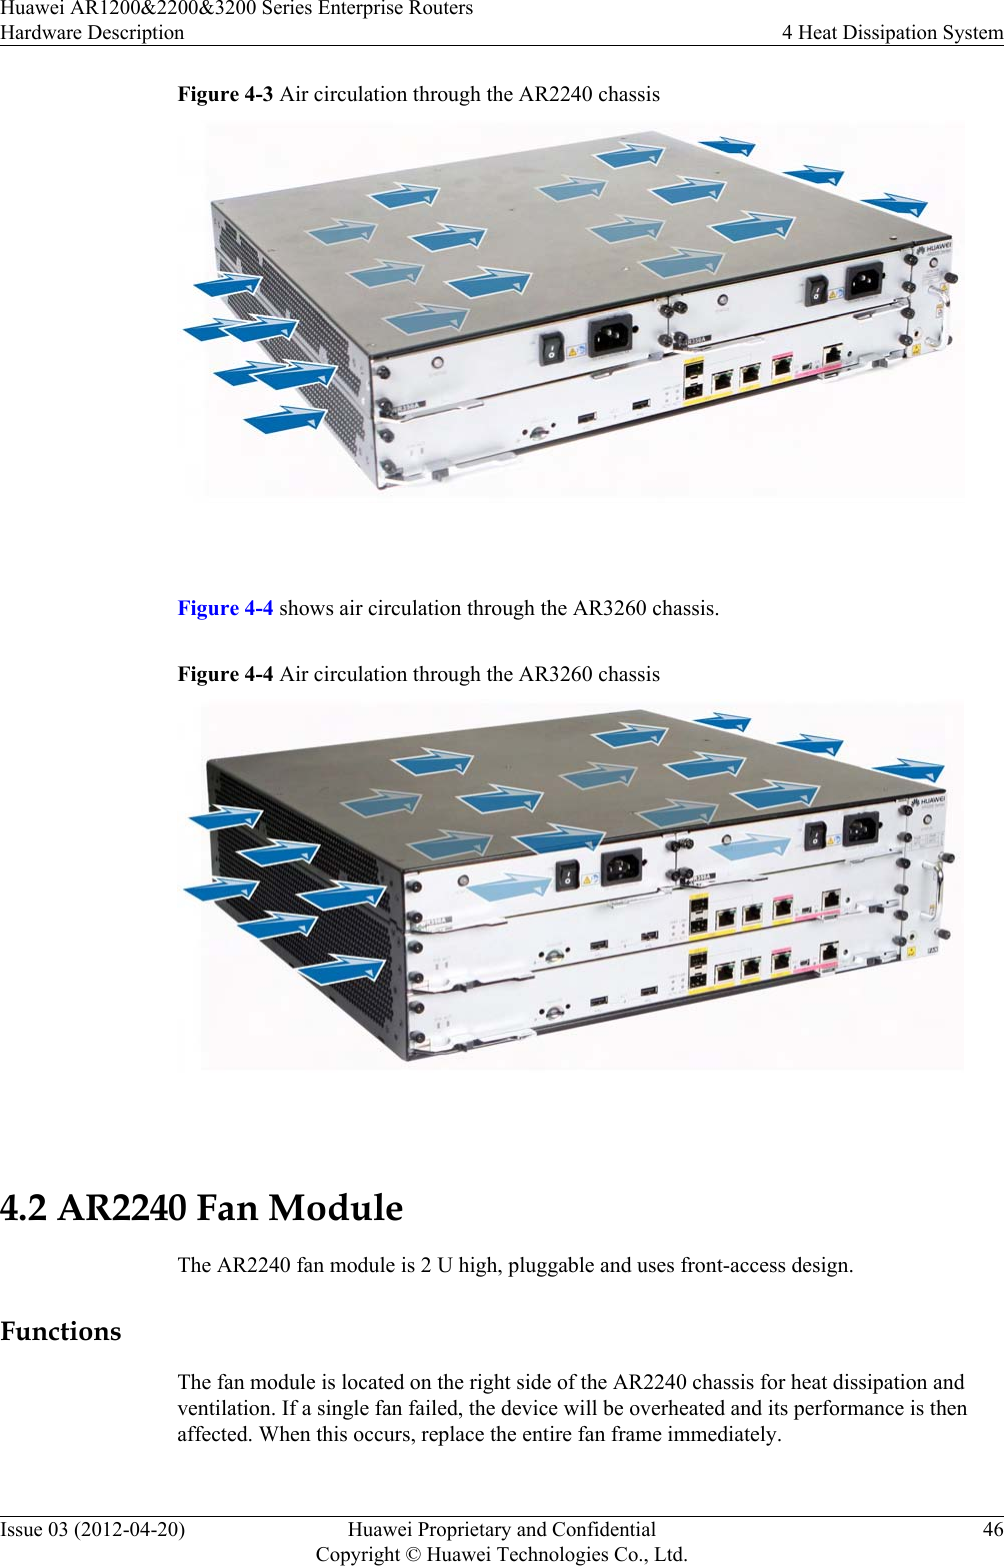 Figure 4-3 Air circulation through the AR2240 chassis Figure 4-4 shows air circulation through the AR3260 chassis.Figure 4-4 Air circulation through the AR3260 chassis 4.2 AR2240 Fan ModuleThe AR2240 fan module is 2 U high, pluggable and uses front-access design.FunctionsThe fan module is located on the right side of the AR2240 chassis for heat dissipation andventilation. If a single fan failed, the device will be overheated and its performance is thenaffected. When this occurs, replace the entire fan frame immediately.Huawei AR1200&amp;2200&amp;3200 Series Enterprise RoutersHardware Description 4 Heat Dissipation SystemIssue 03 (2012-04-20) Huawei Proprietary and ConfidentialCopyright © Huawei Technologies Co., Ltd.46